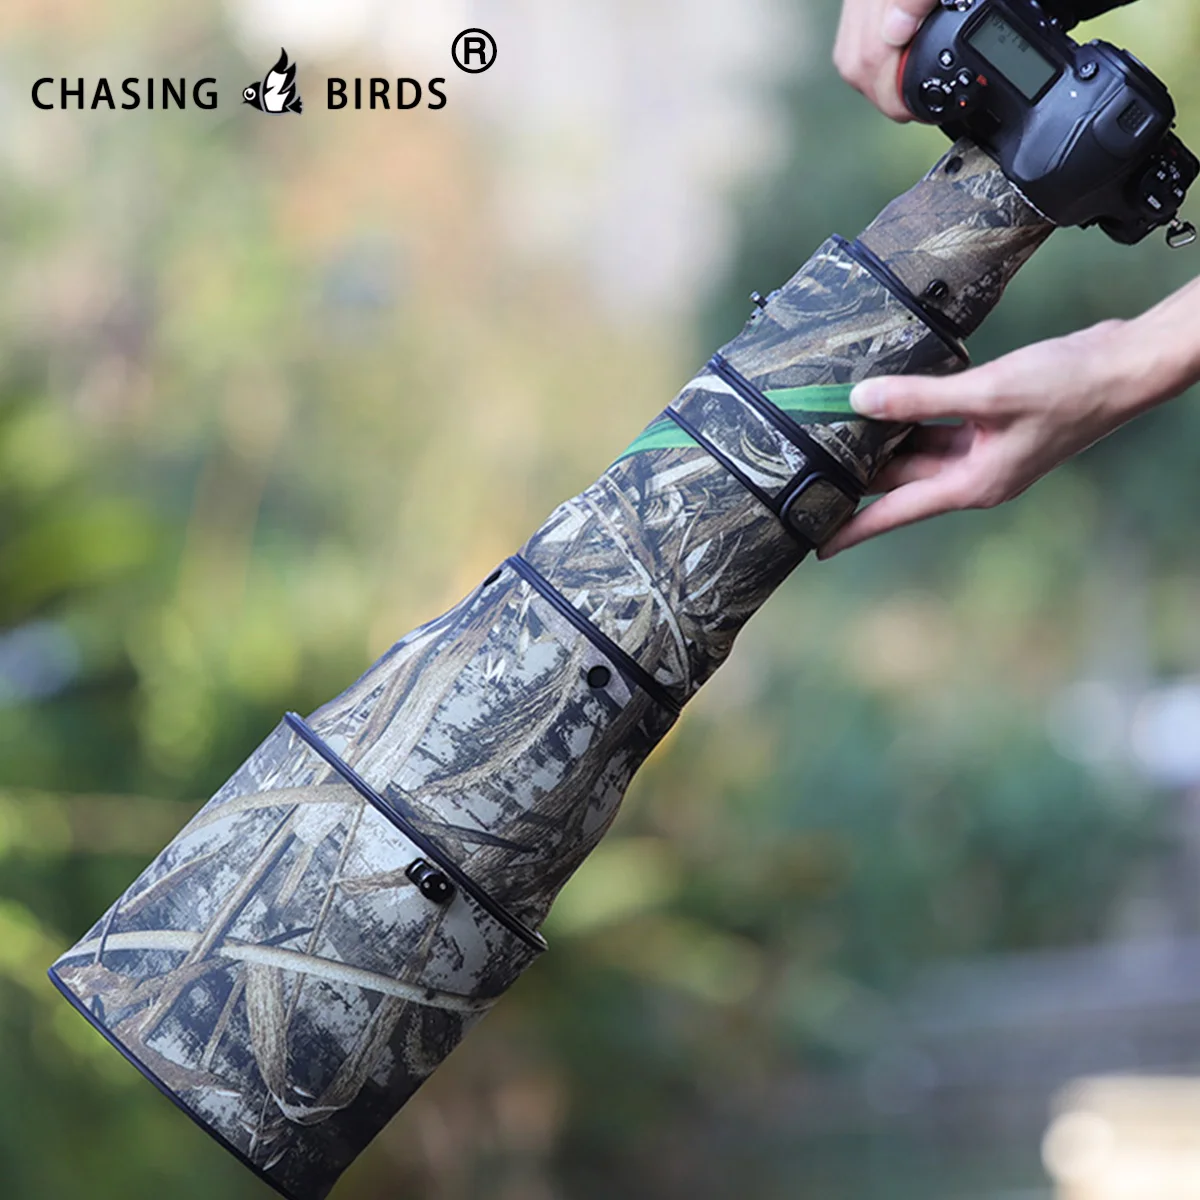 

CHASING BIRDS camouflage lens coat for NIKON AF-S 800mm F5.6 E FL ED VR elastic waterproof and rainproof lens protective cover